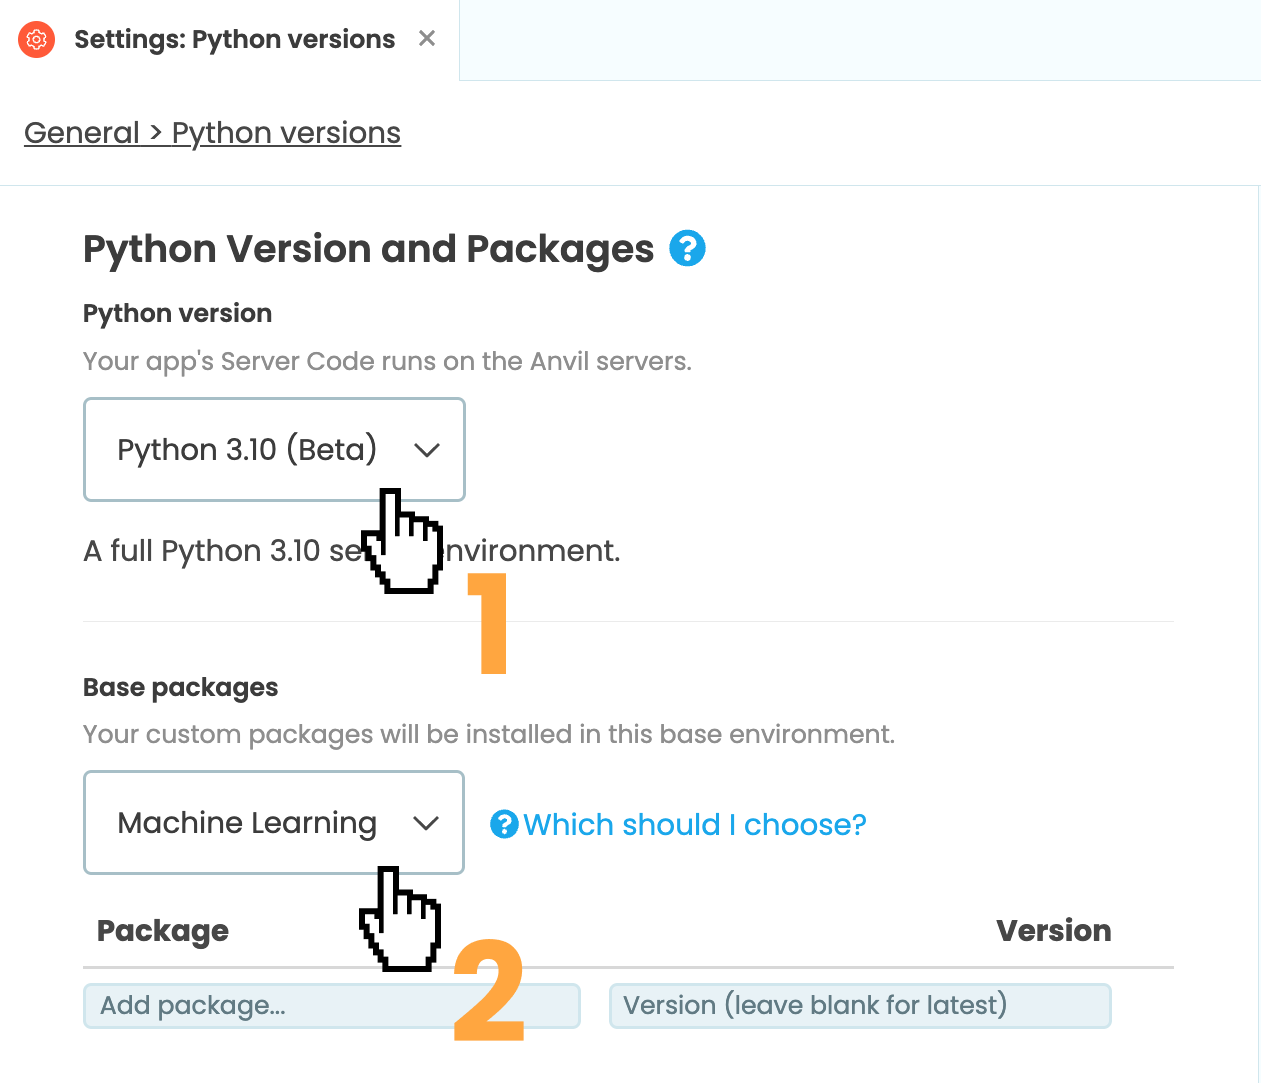 Changing the Python version to 'Python 3.10' and editing the requirements.txt